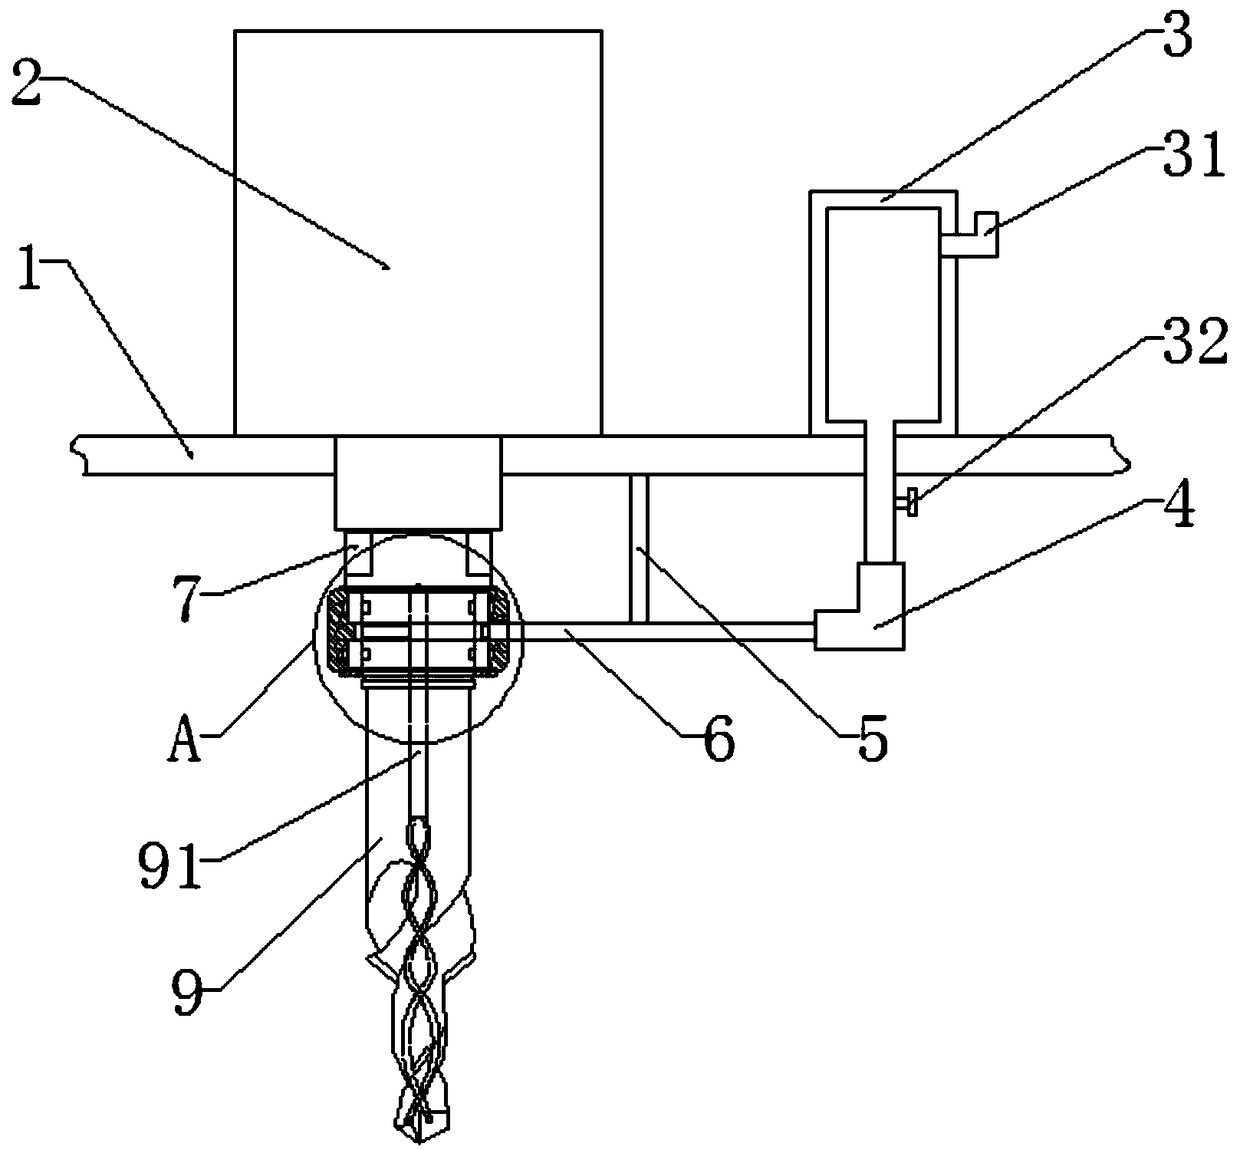 Inner cooling drilling, reaming and countersinking integrated tool and system comprising tool